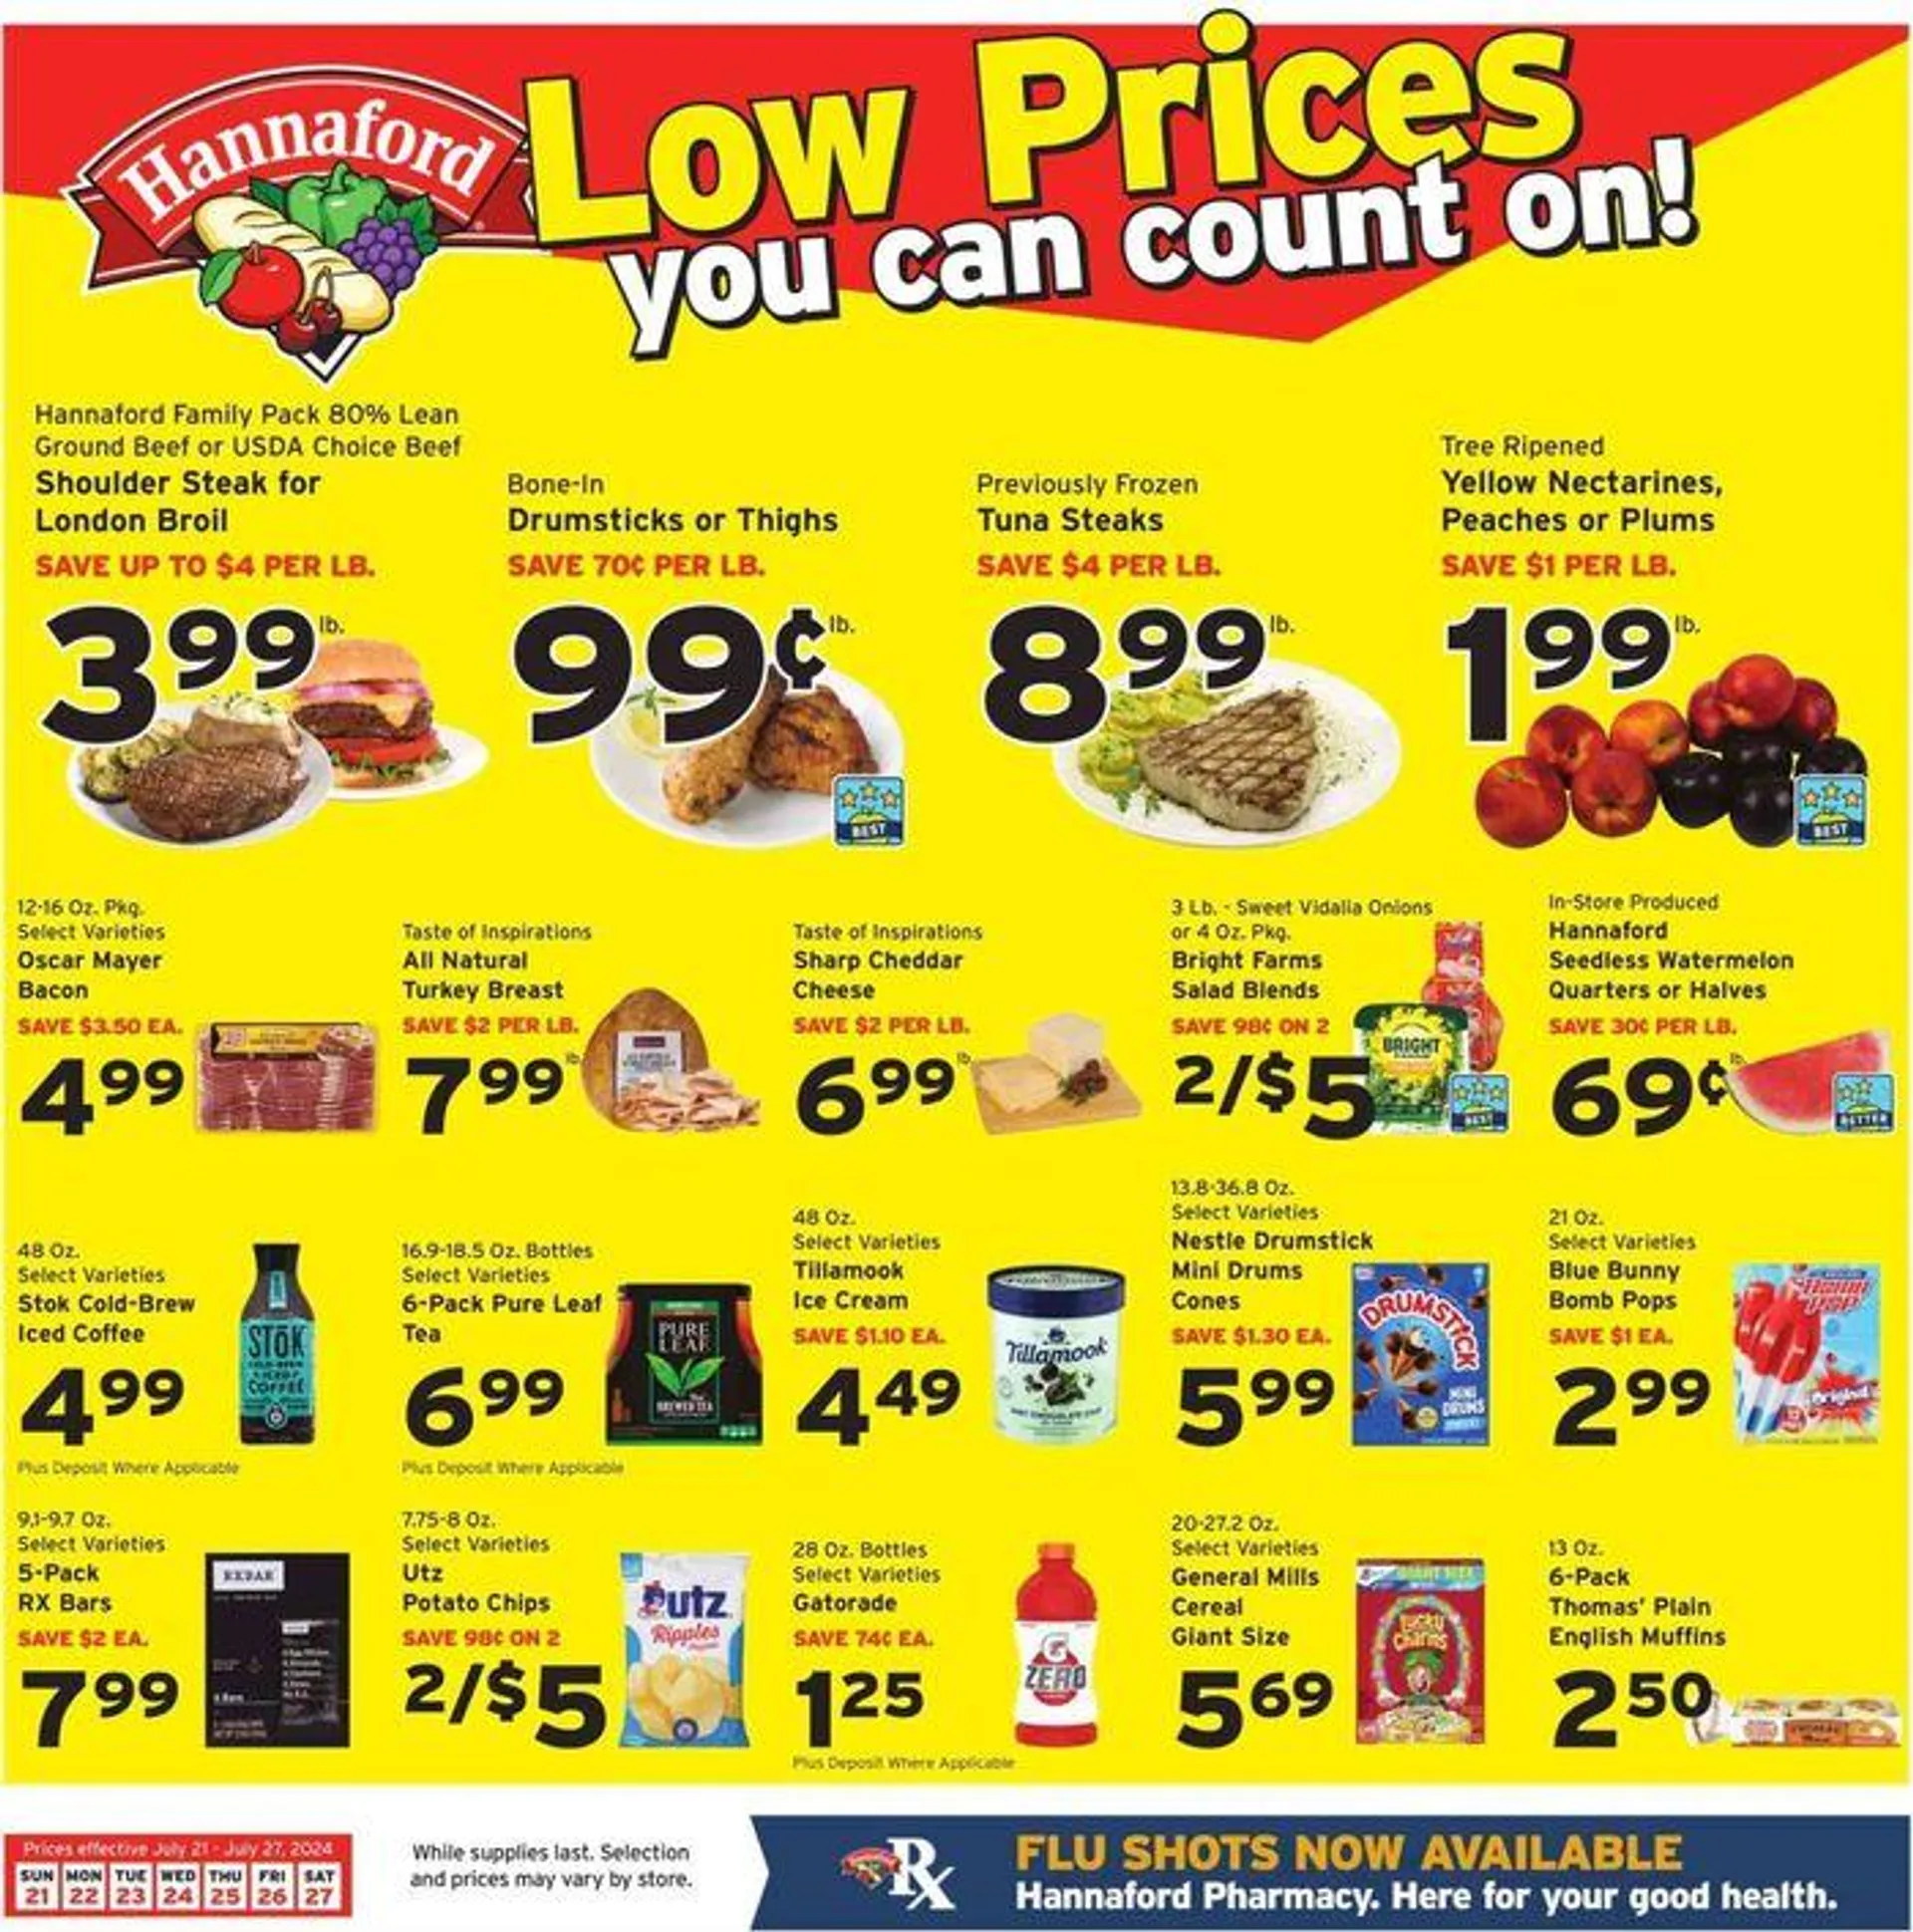 Low Prices You Can Count On! - 1